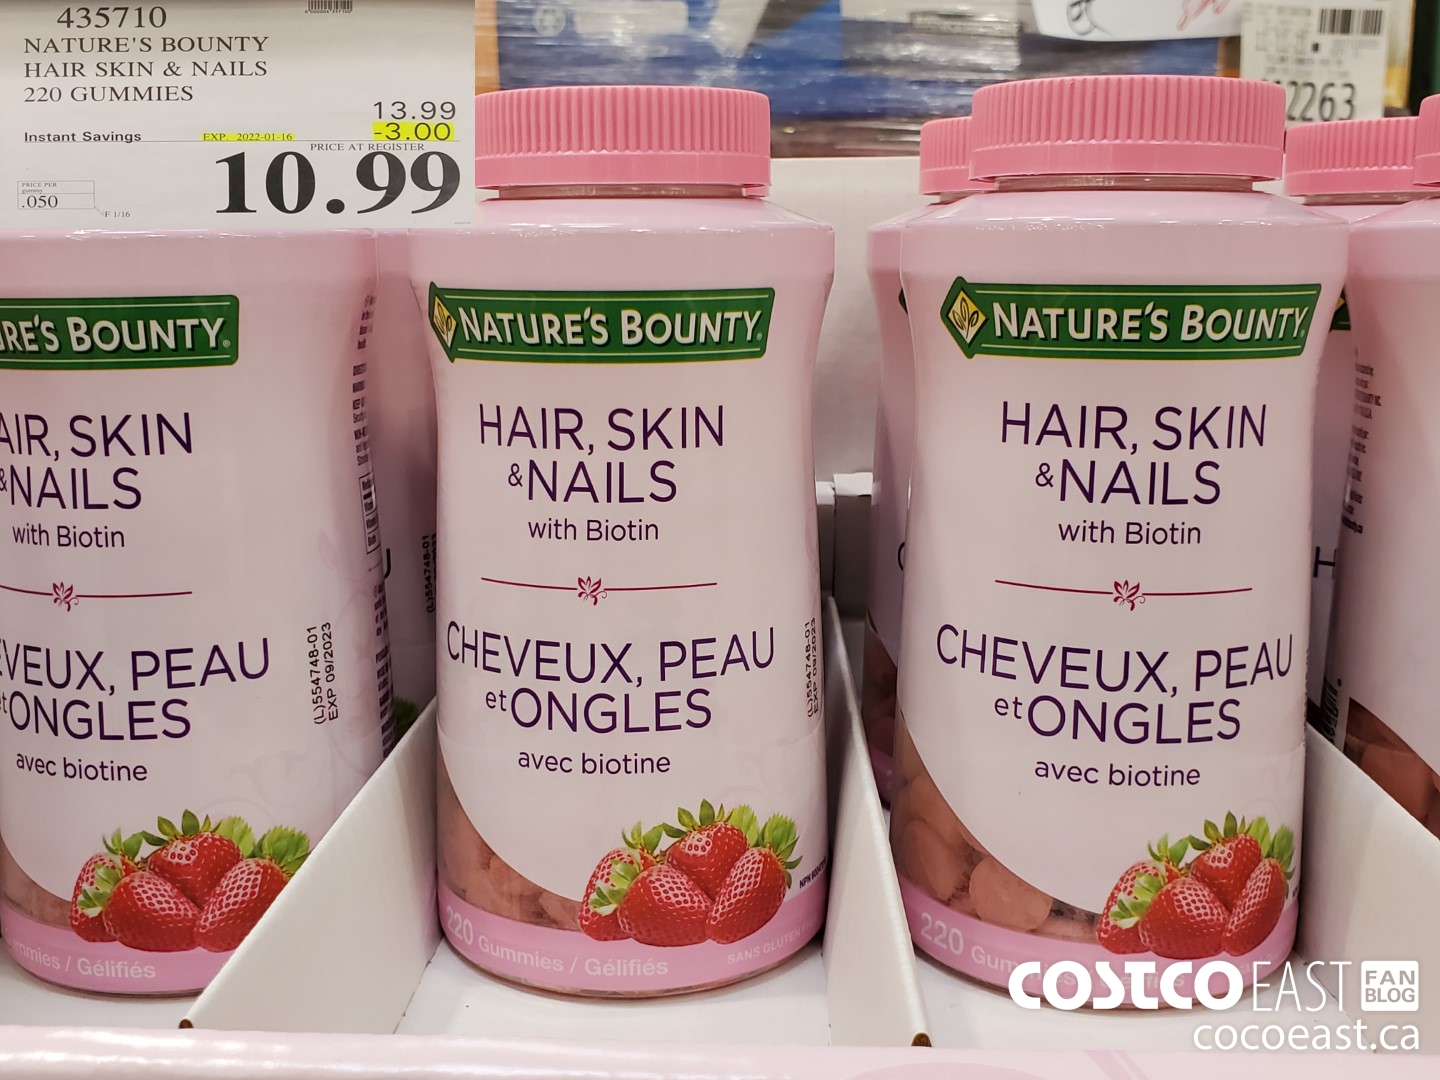 435710 NATURE S BOUNTY HAIR SKIN NAILS 220 GUMMIES 3 00 INSTANT SAVINGS  EXPIRES ON 2022 01 16 10 99 - Costco East Fan Blog